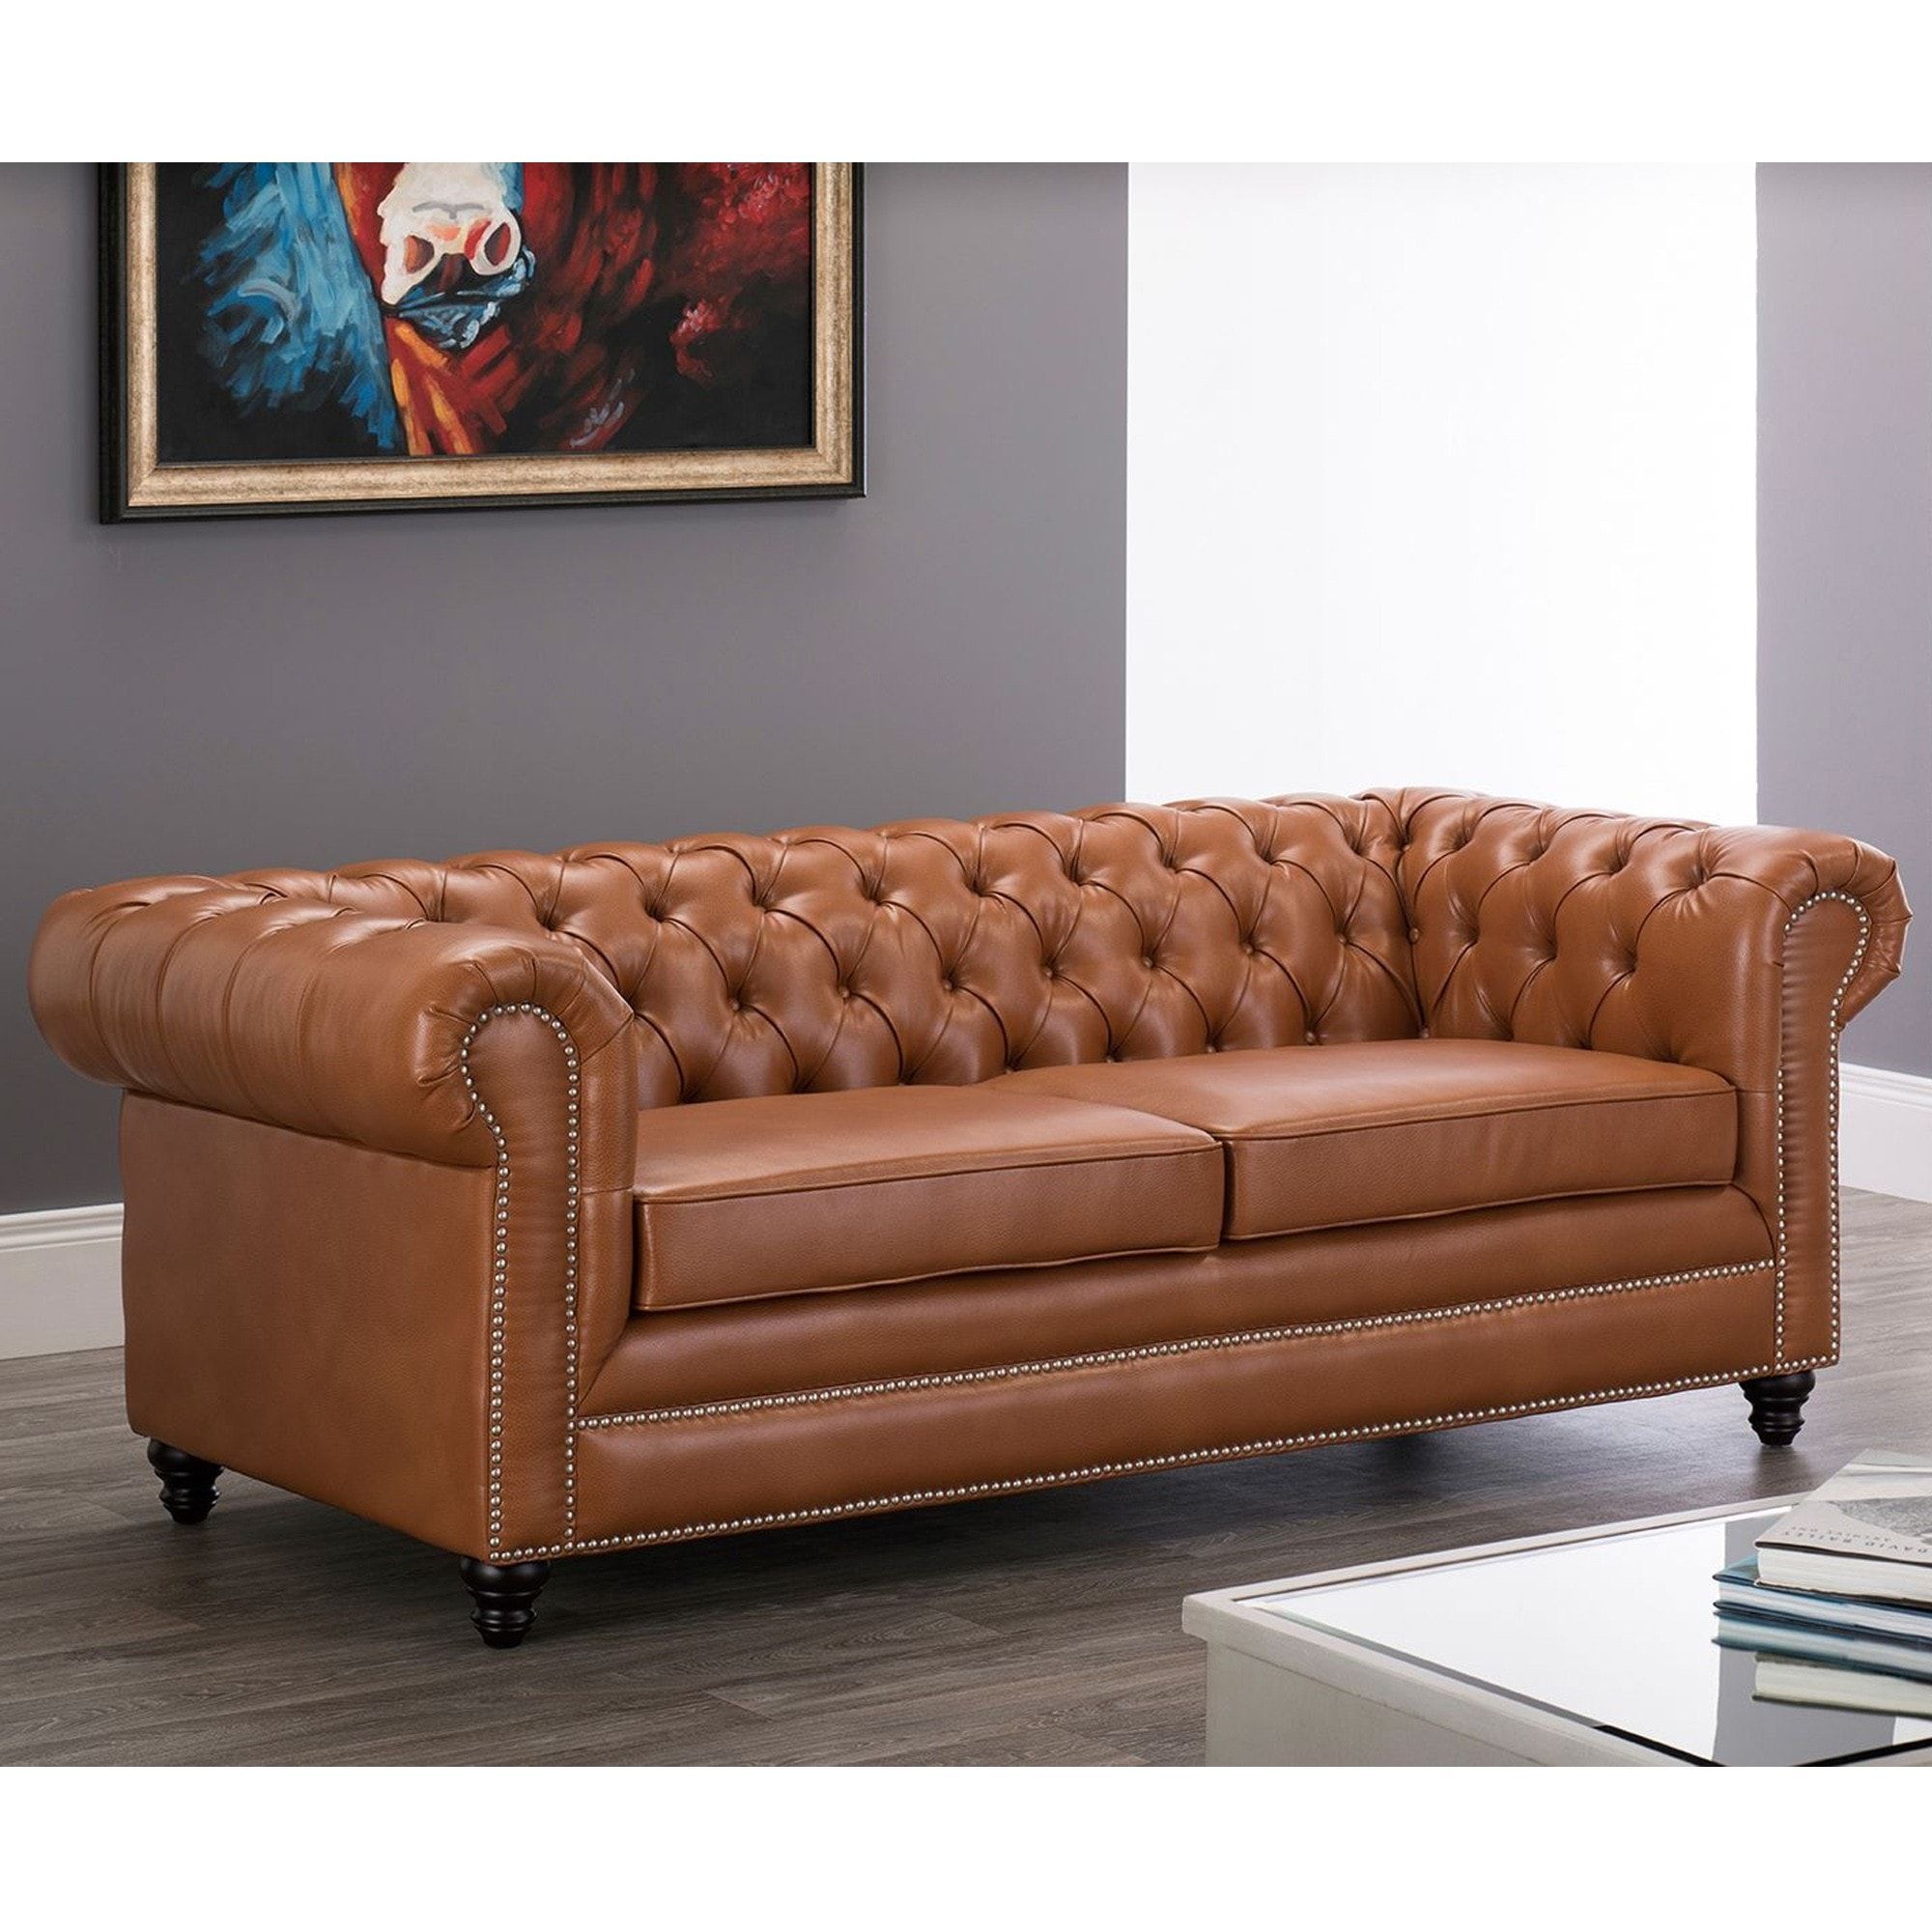 Faux Leather Chesterfield 3 Seater Sofa Tan | Tan Chesterfield Sofa Inside Chesterfield Sofas (View 4 of 21)